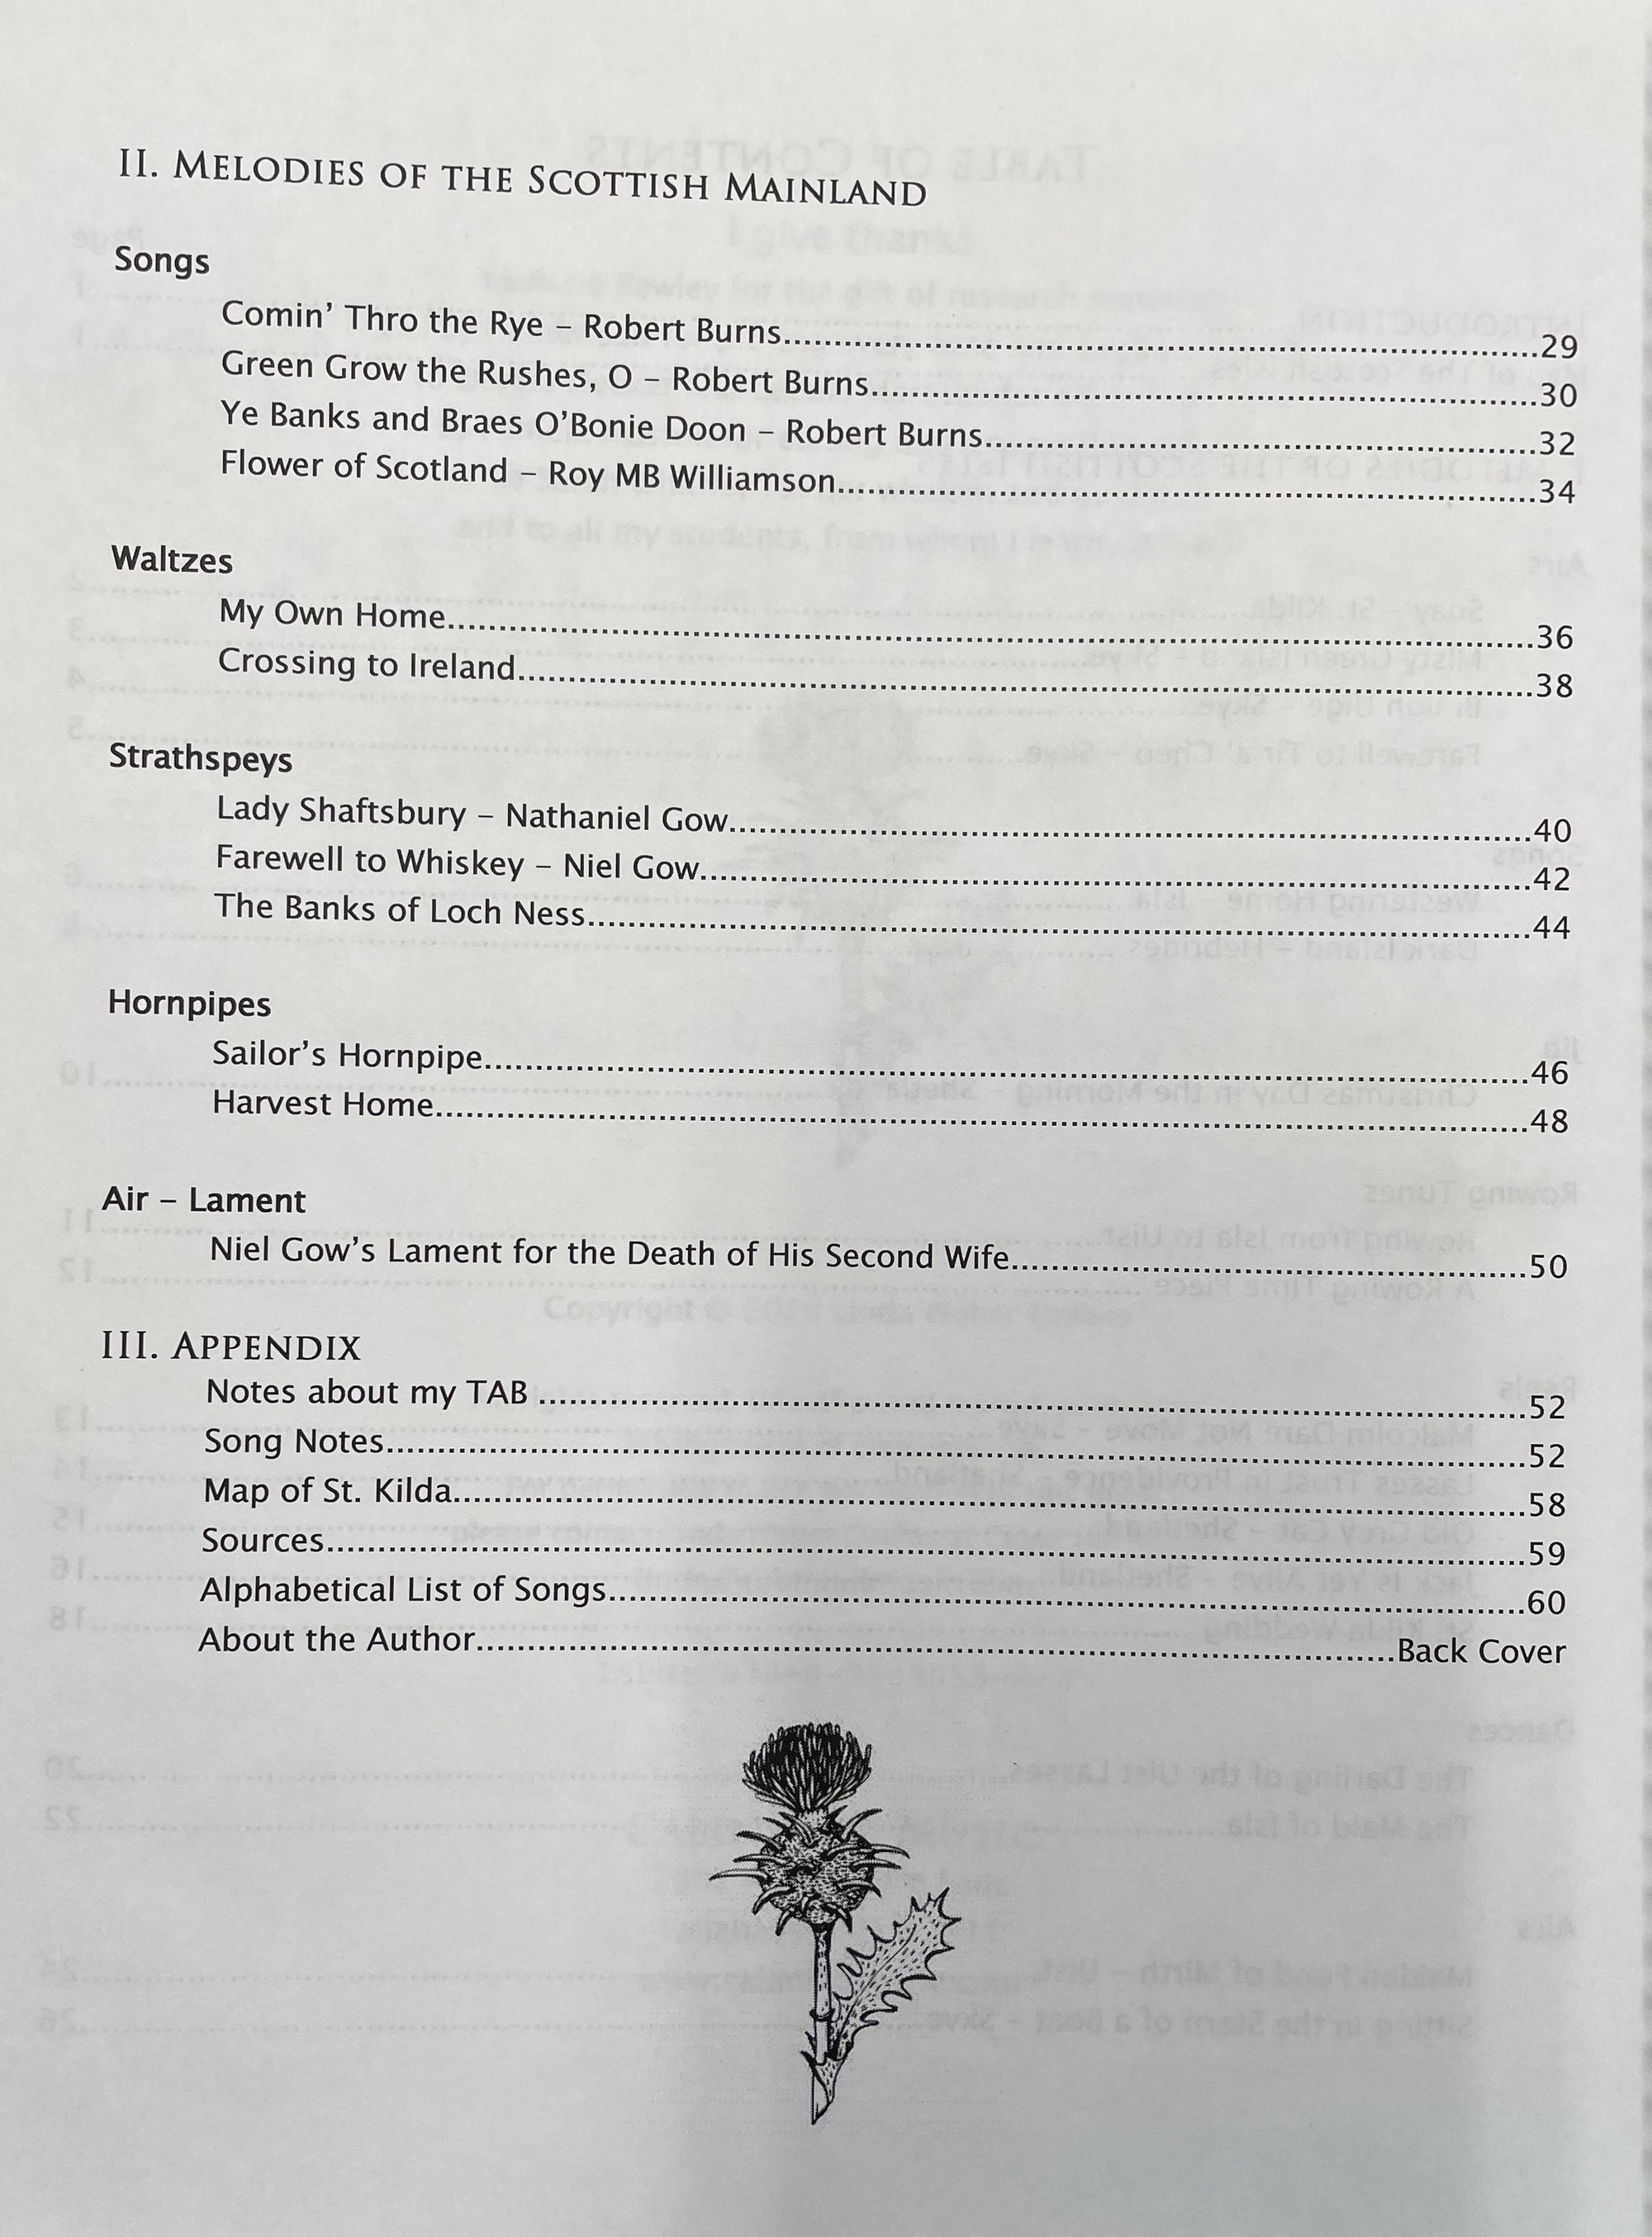 Table of contents from "Melodies of the Scottish Isles and Mainland by Linda Weber Collins," featuring sections on melodies, airs, and laments for the mountain dulcimer, with a thistle illustration at the bottom.